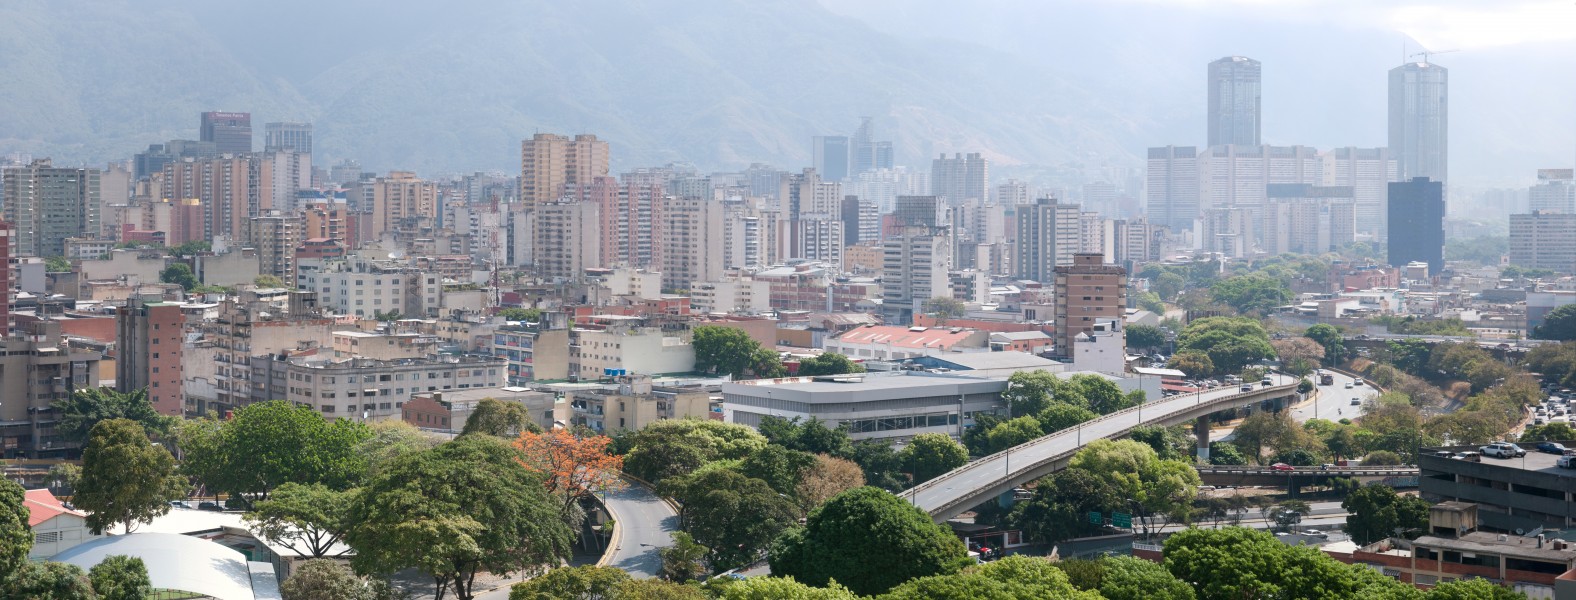 Panoramic View of Caracas from Militar Hospital